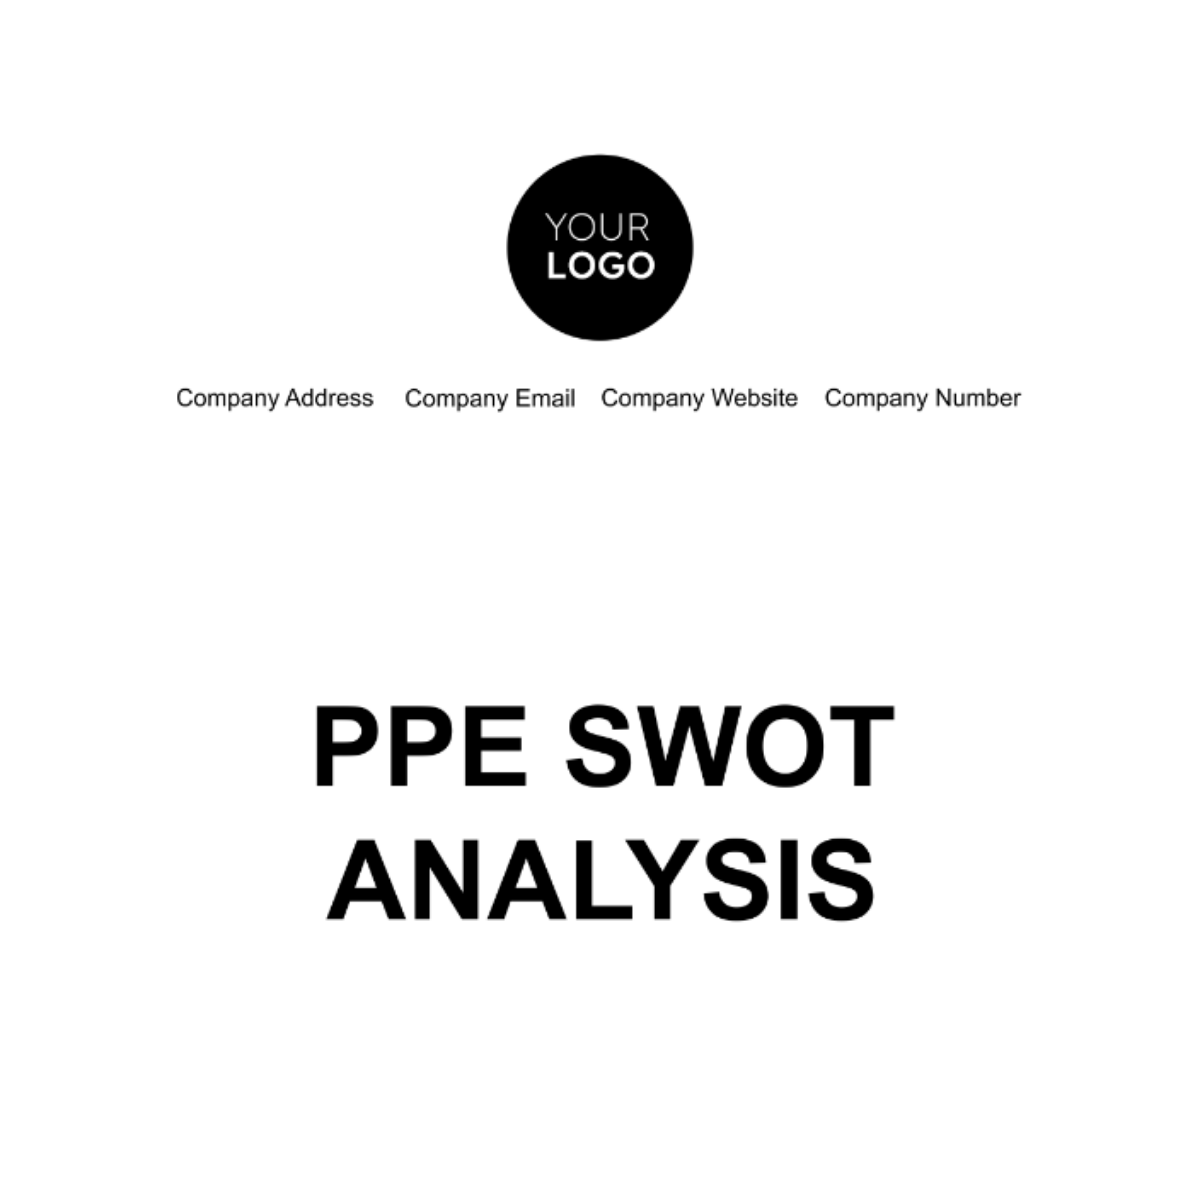 PPE SWOT Analysis Template